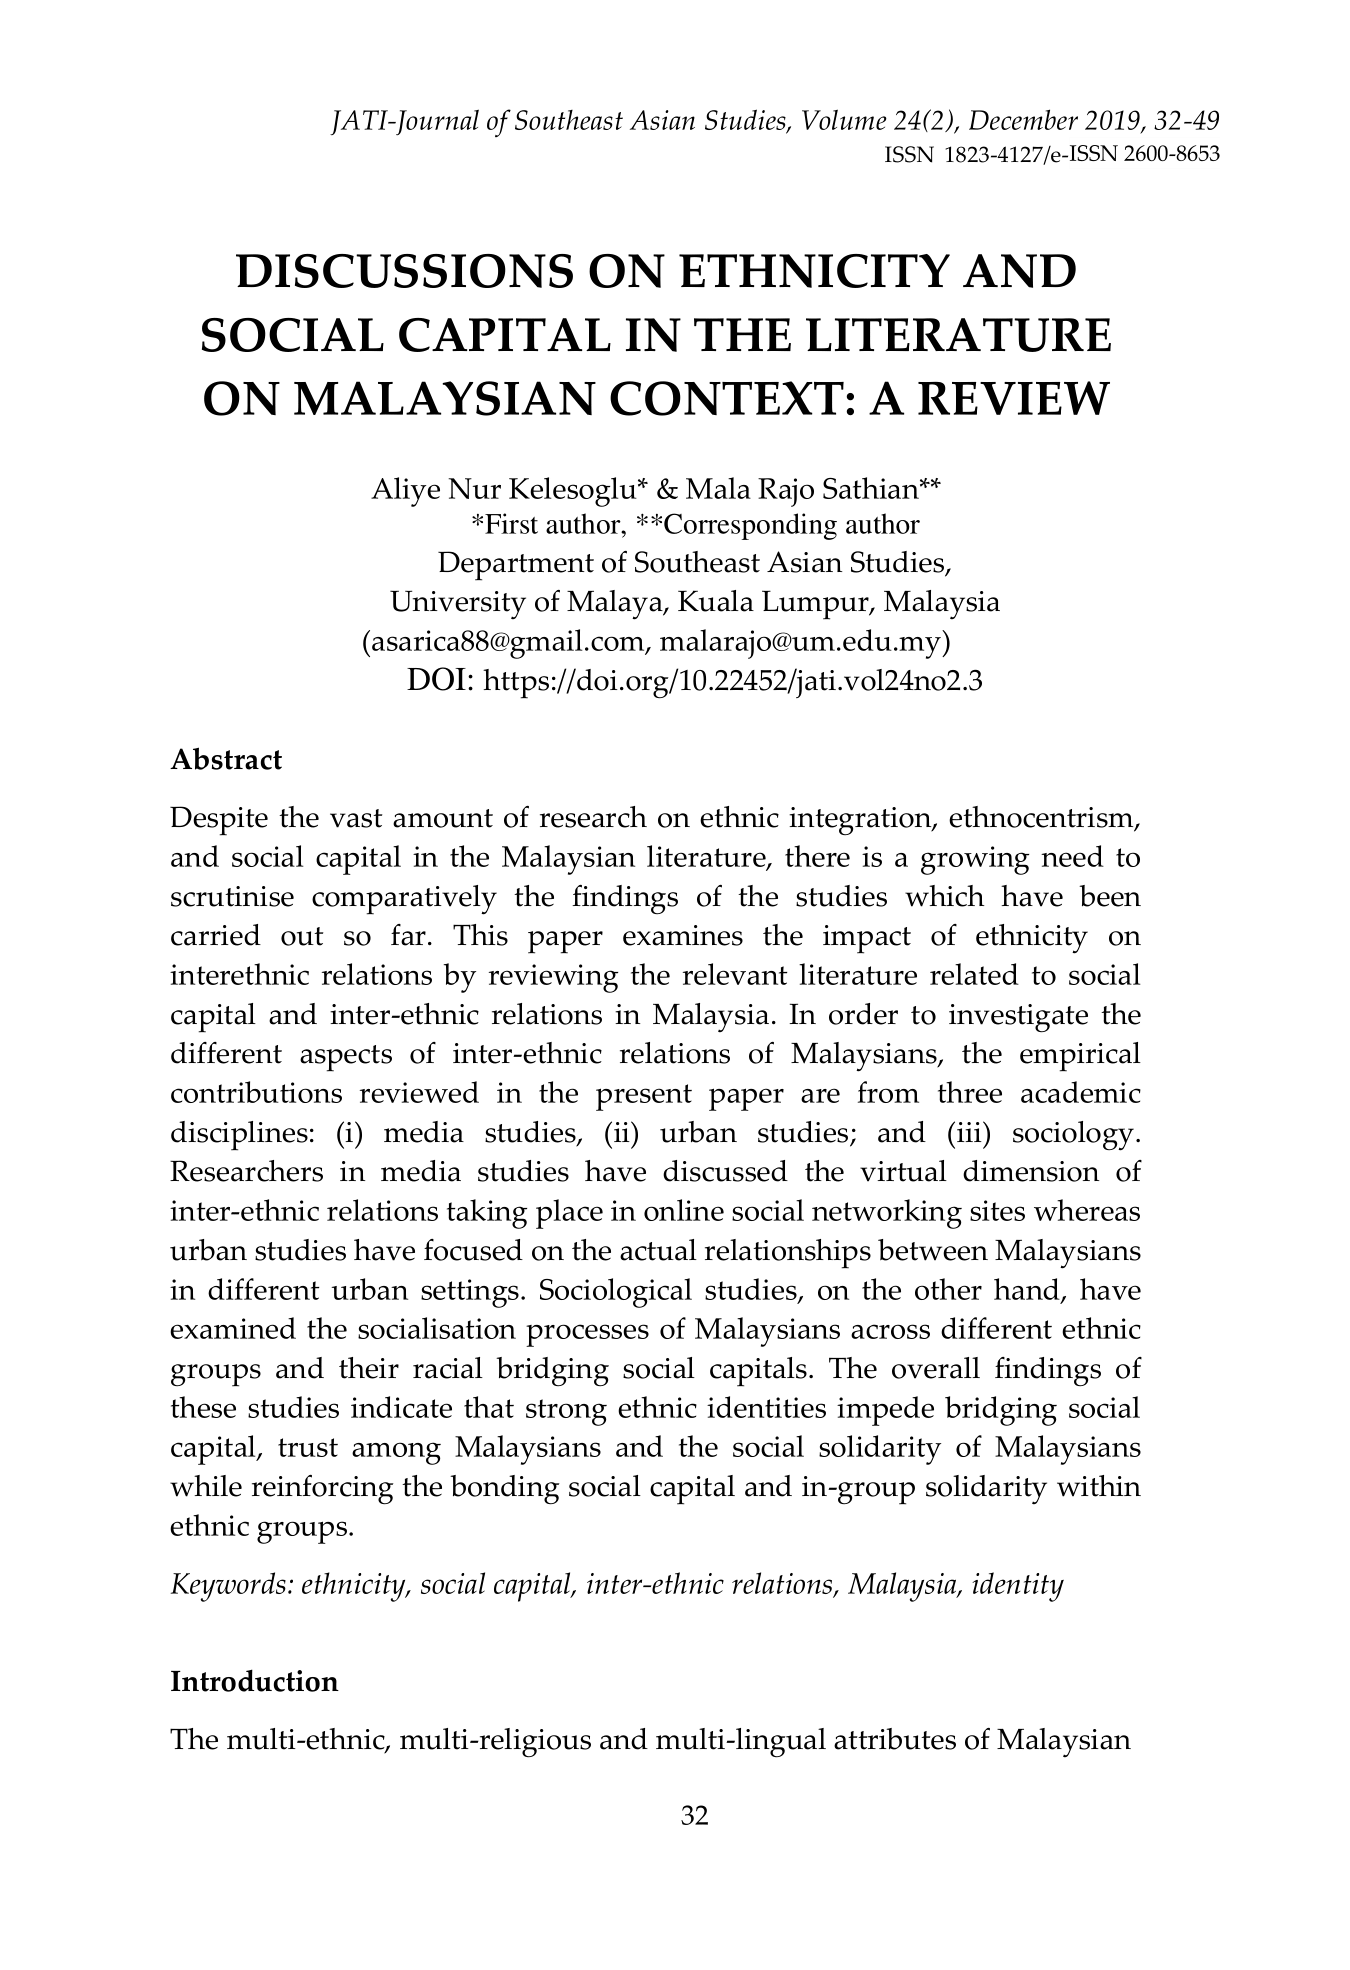 social issues in malaysia essay